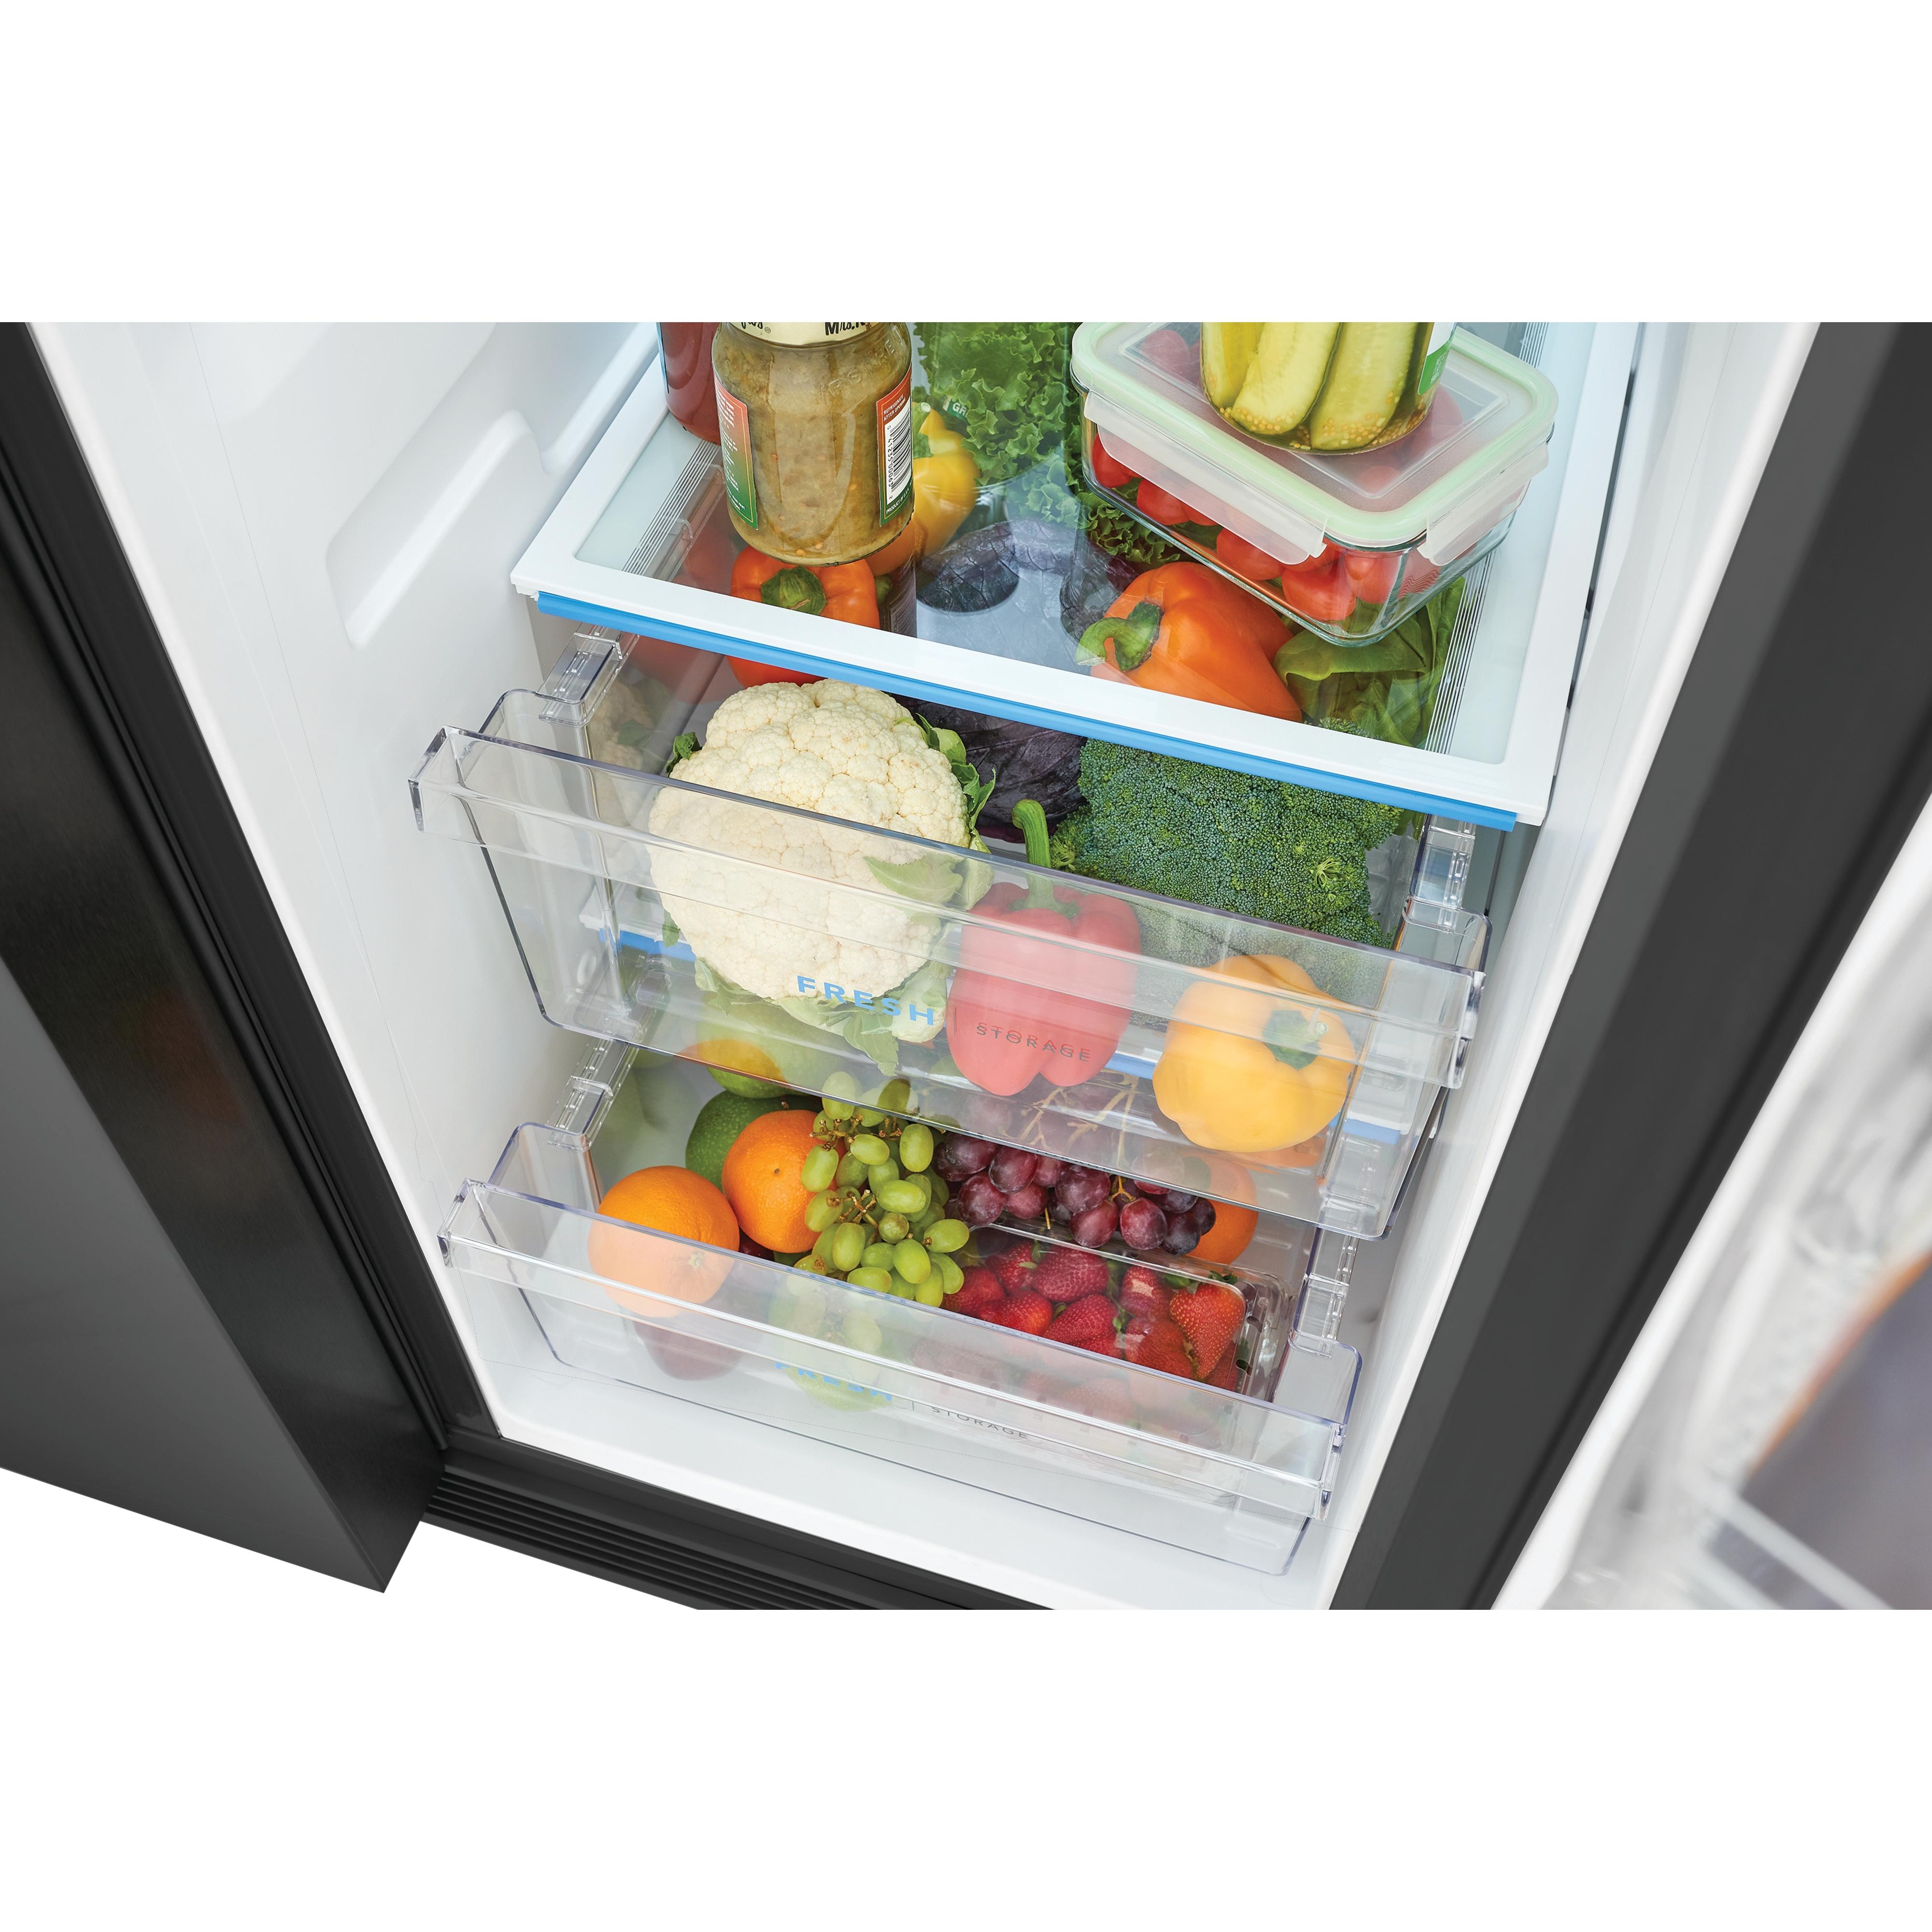 Frigidaire 36-inch, 25.6 cu.ft. Freestanding Side-by-Side Refrigerator with Ice and Water Dispensing System FRSS2623AD